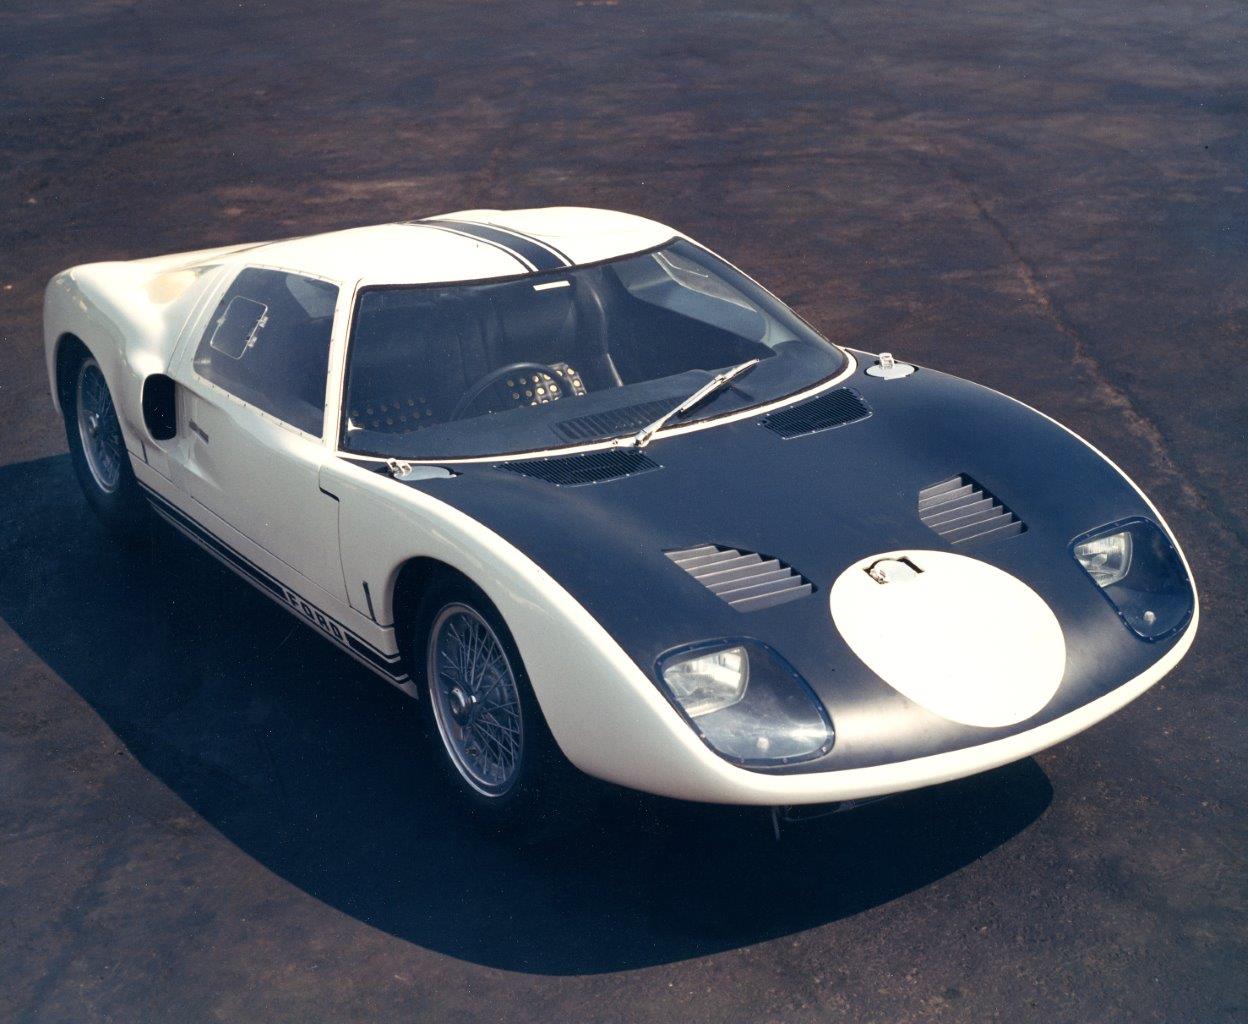 The new Ford GT as it was unveiled to the world’s press in 1964.